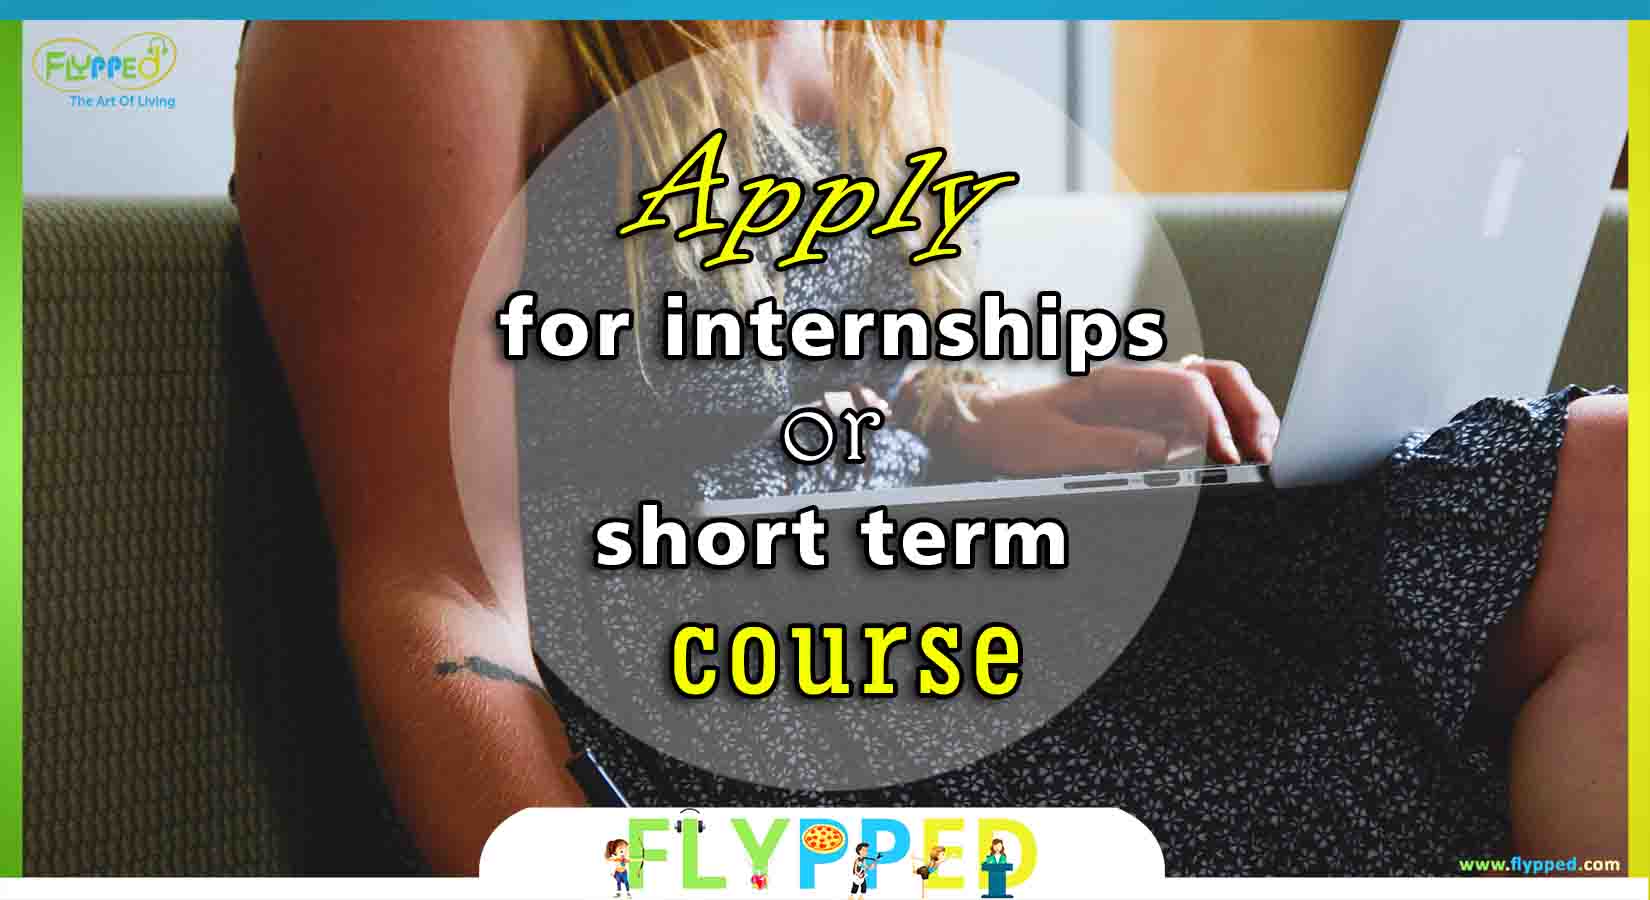 Effective-ways-for-students-to-spend-their-Holidays-Internships